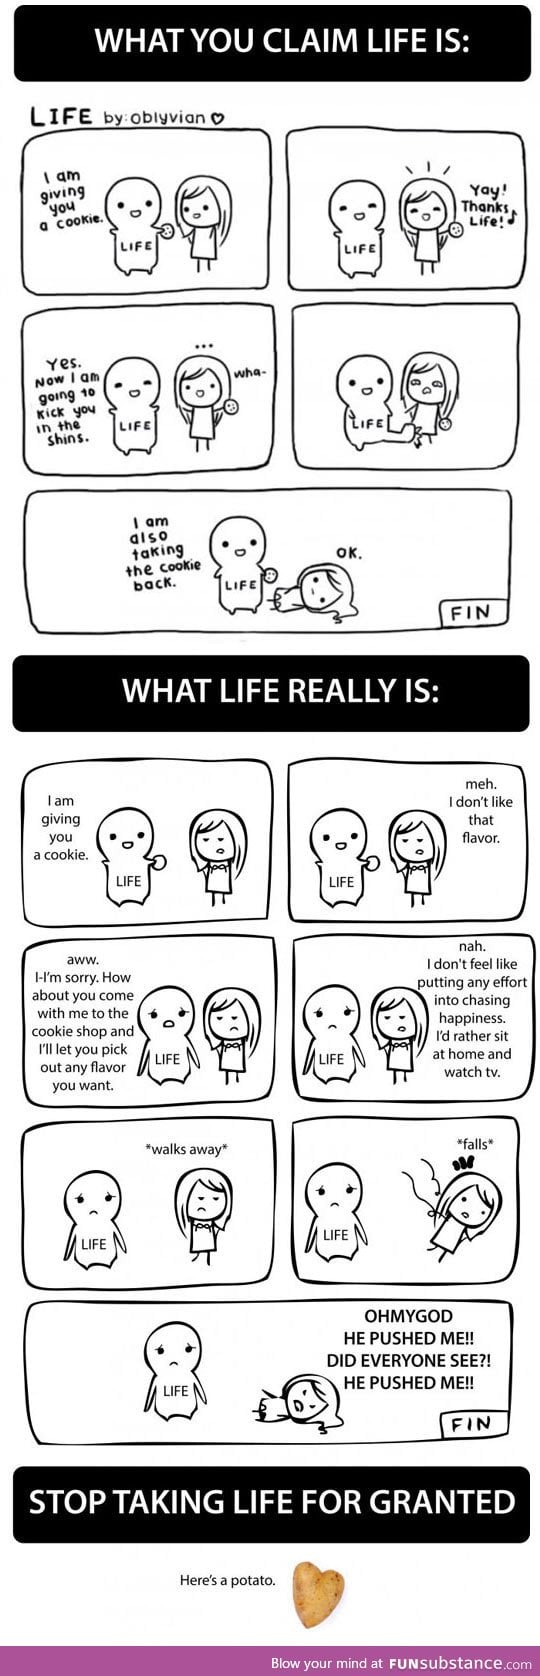 Perhaps this is how life actually goes